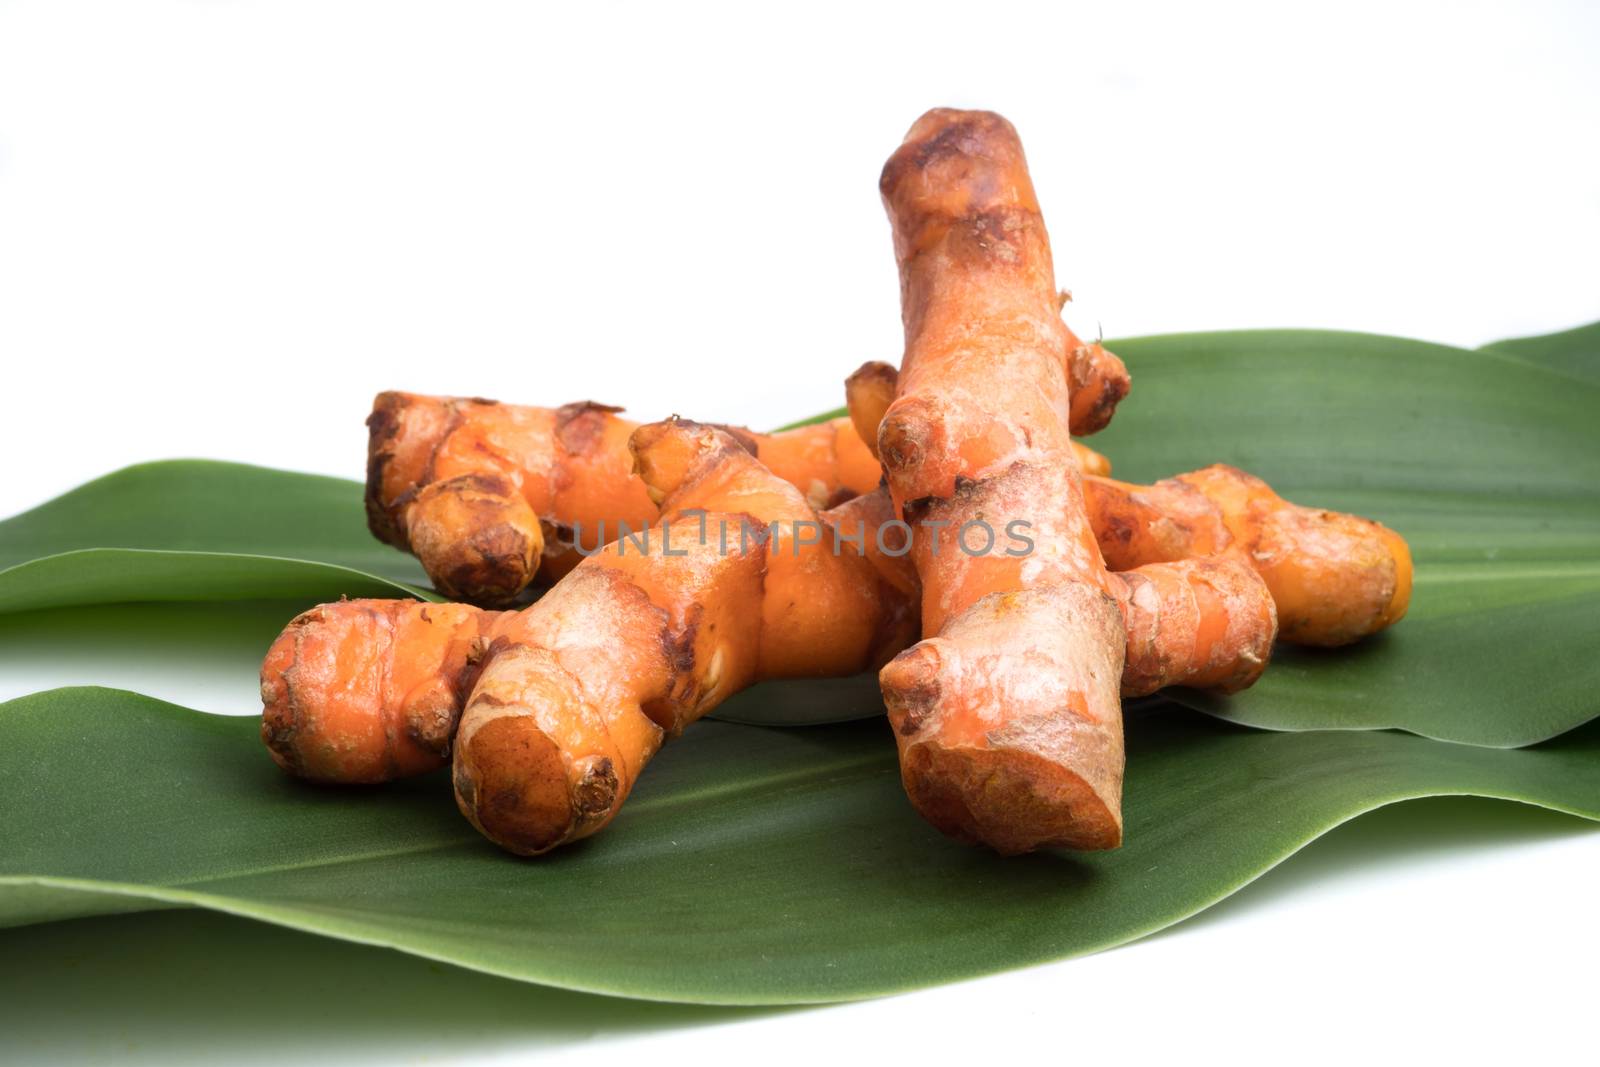 Turmeric roots on green leaf over white background.